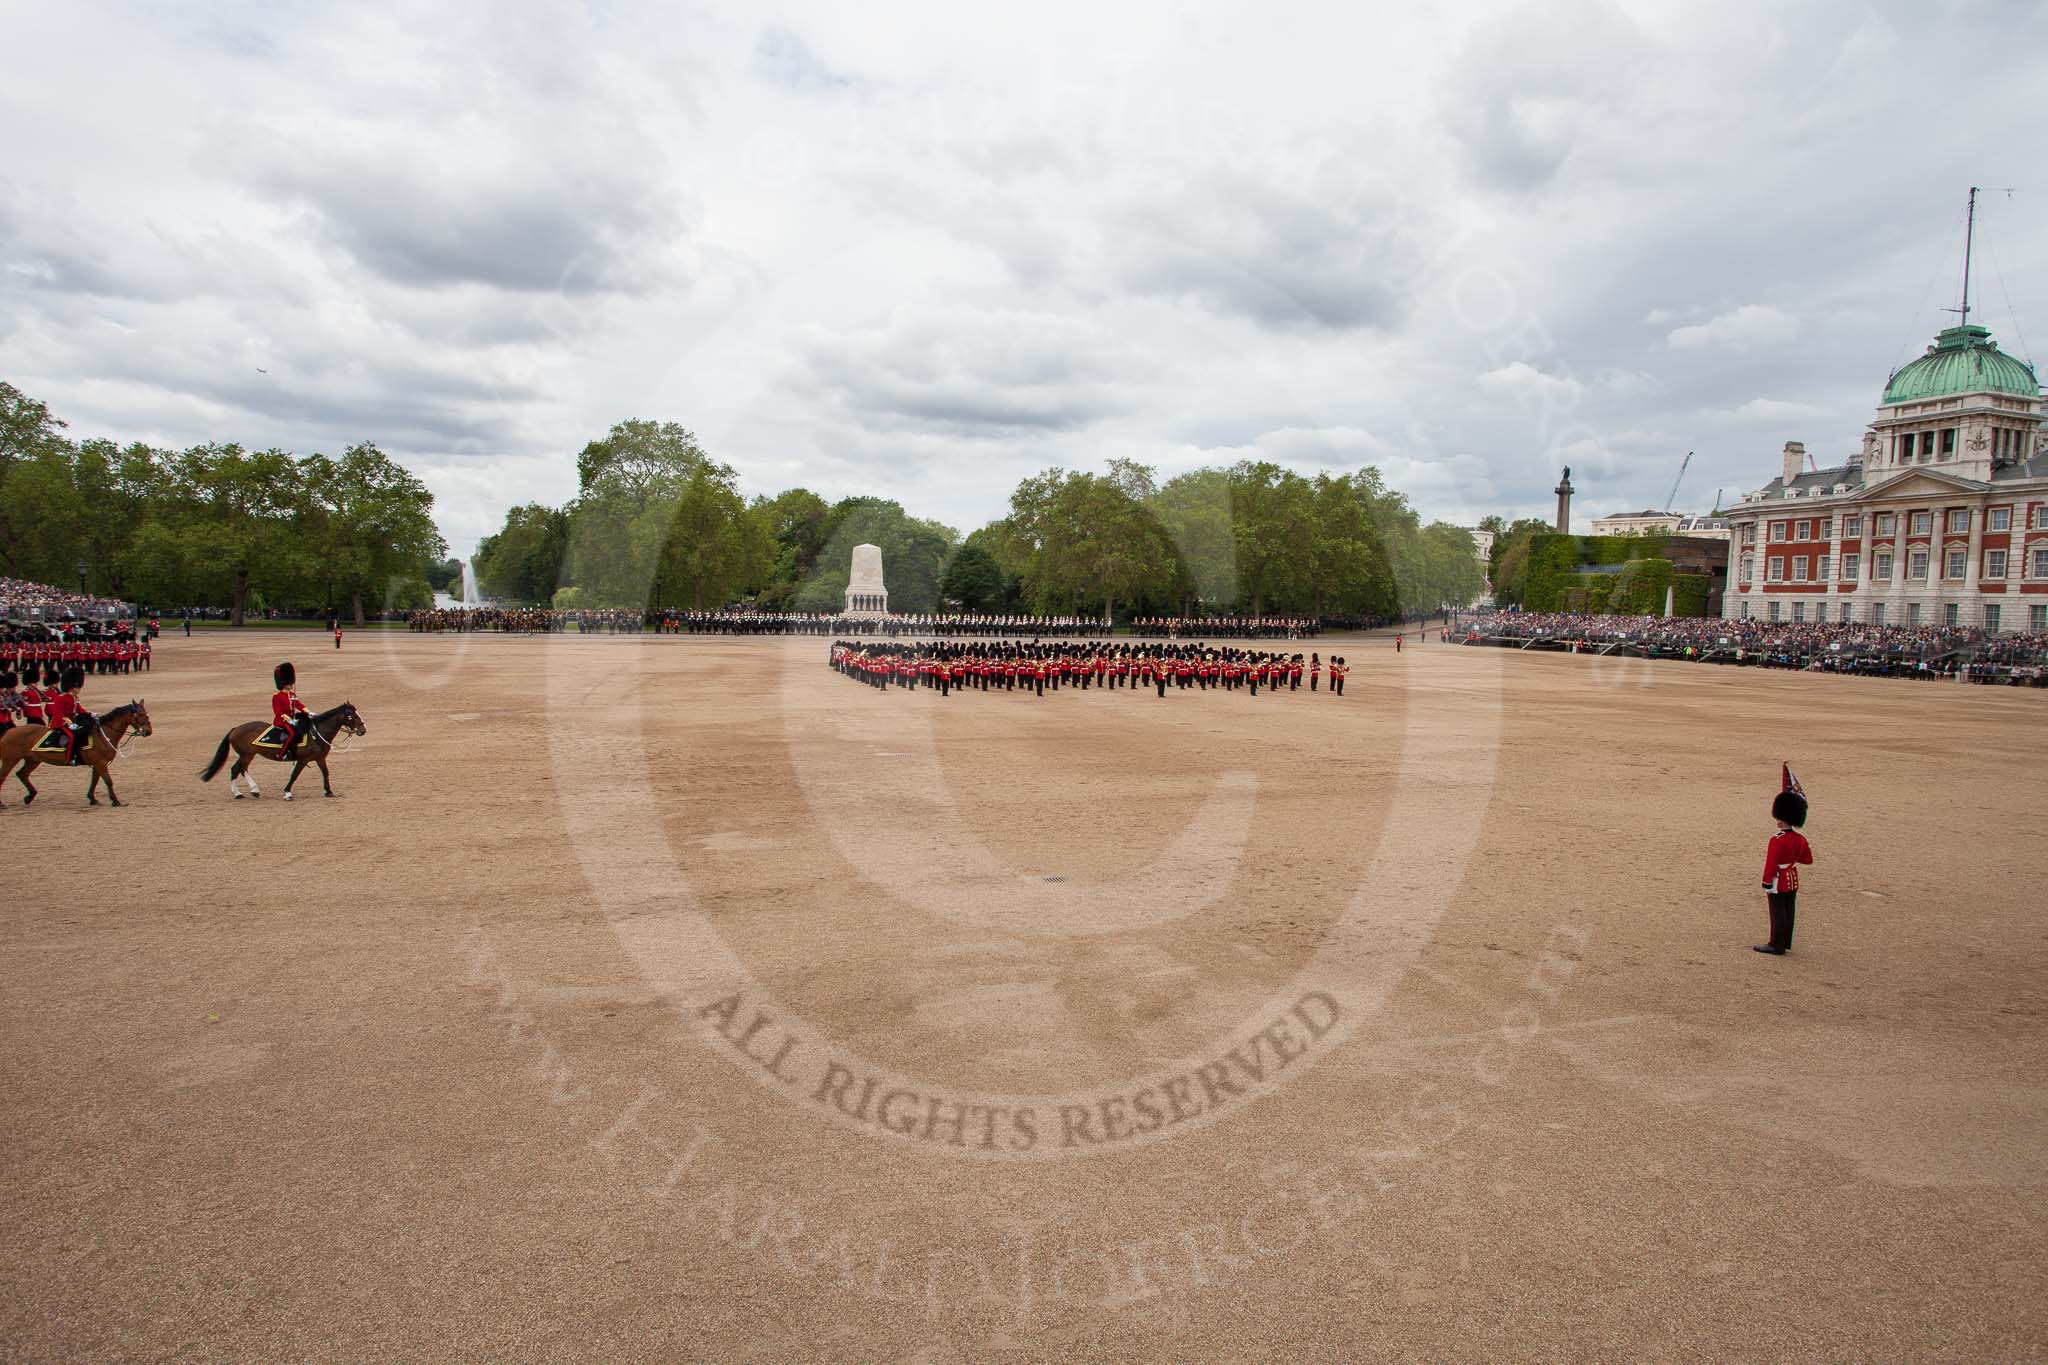 The Colonel's Review 2012: Another overview of Horse Guards Parade during the March Past. The Field Officer, in front of the Major of the Parade, on the left..
Horse Guards Parade, Westminster,
London SW1,

United Kingdom,
on 09 June 2012 at 11:42, image #338